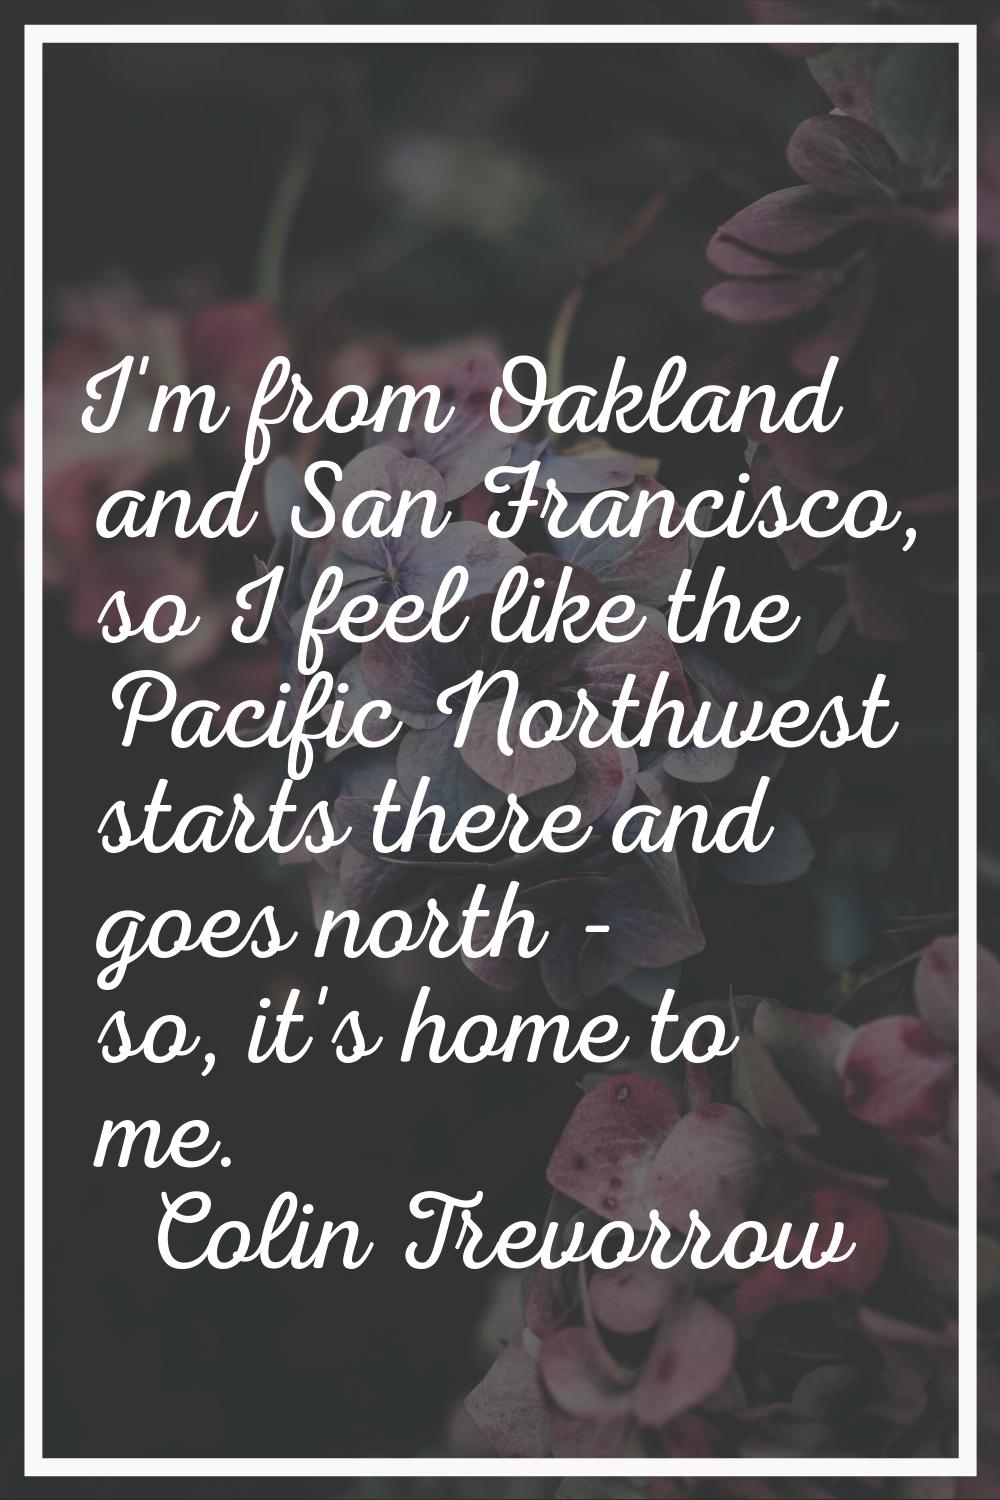 I'm from Oakland and San Francisco, so I feel like the Pacific Northwest starts there and goes nort